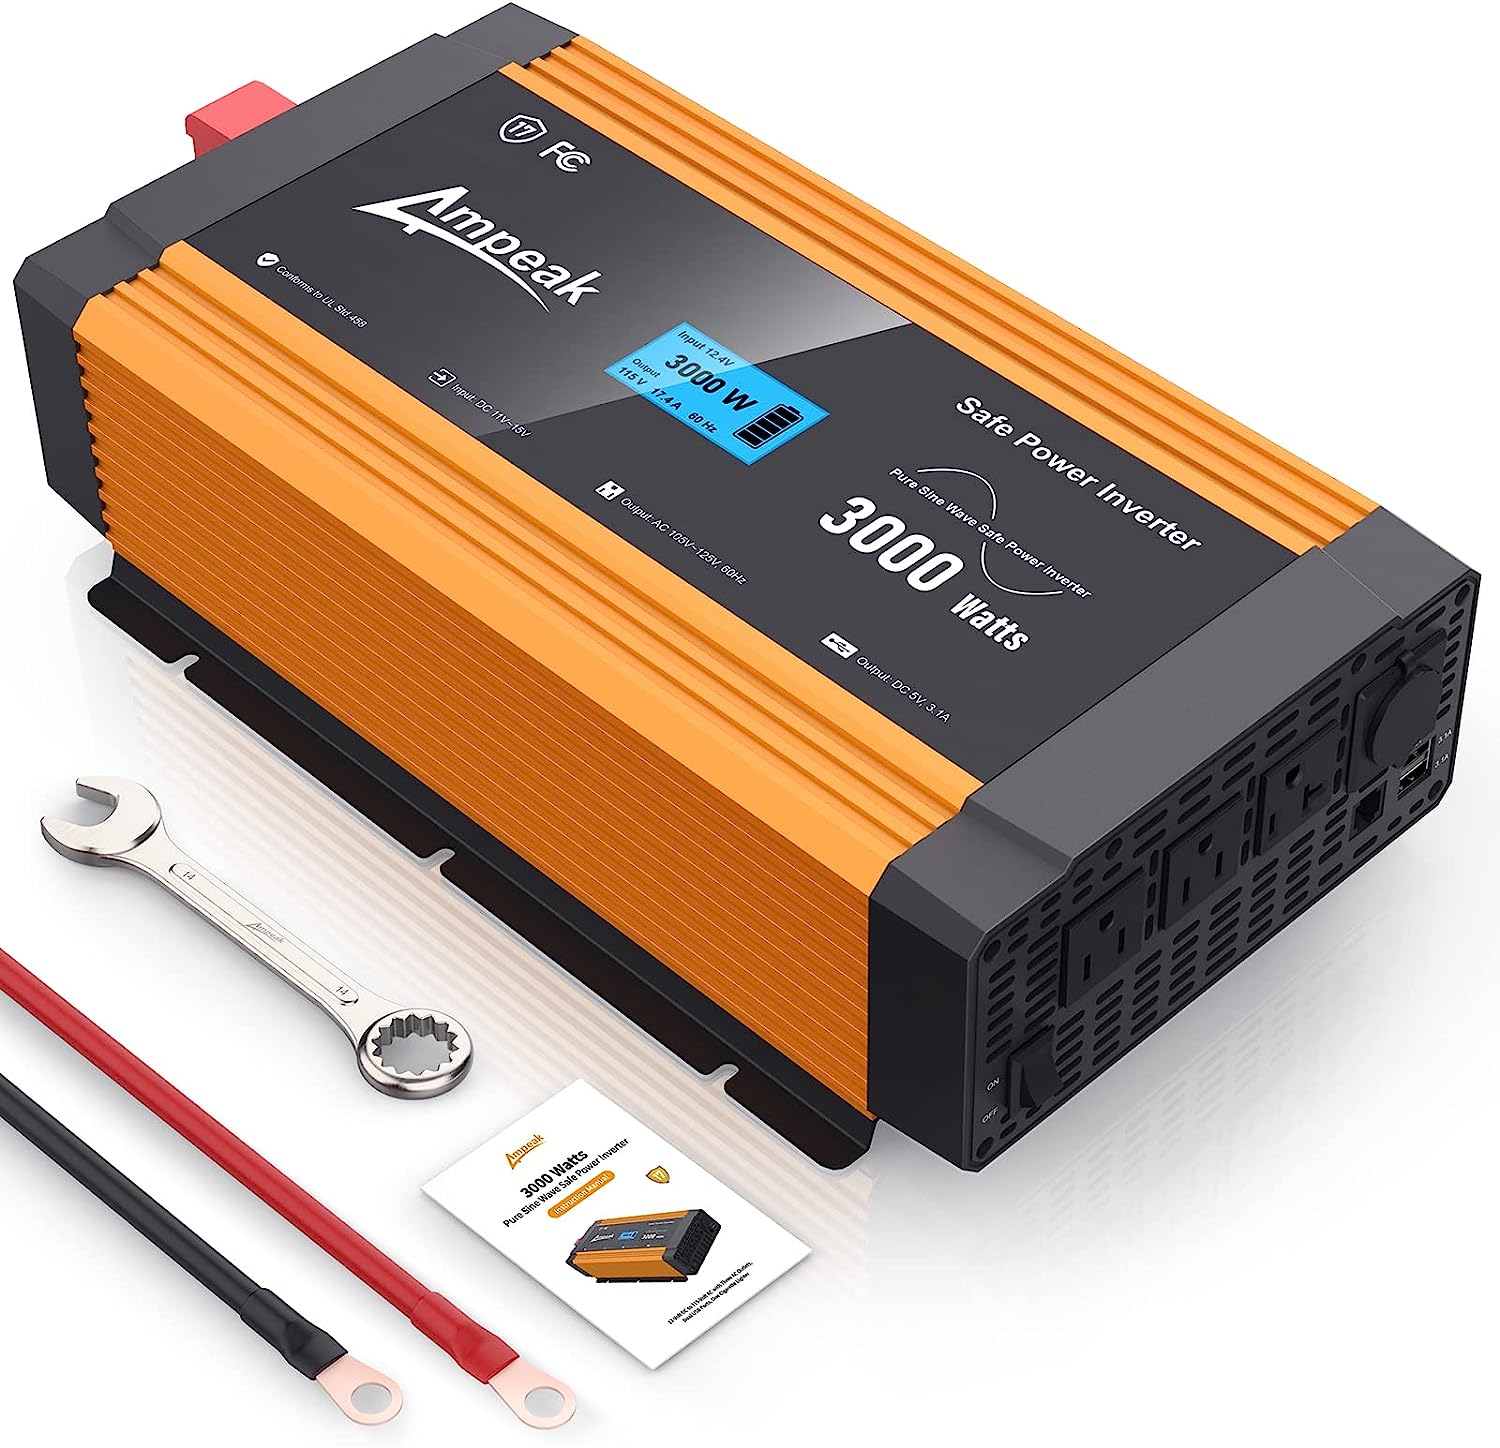 Pure Sine Wave Inverter 3000W by Ampeak: DC 12V to AC 120V, 17 Protections,  3 AC Outlets, Dual USB Ports 